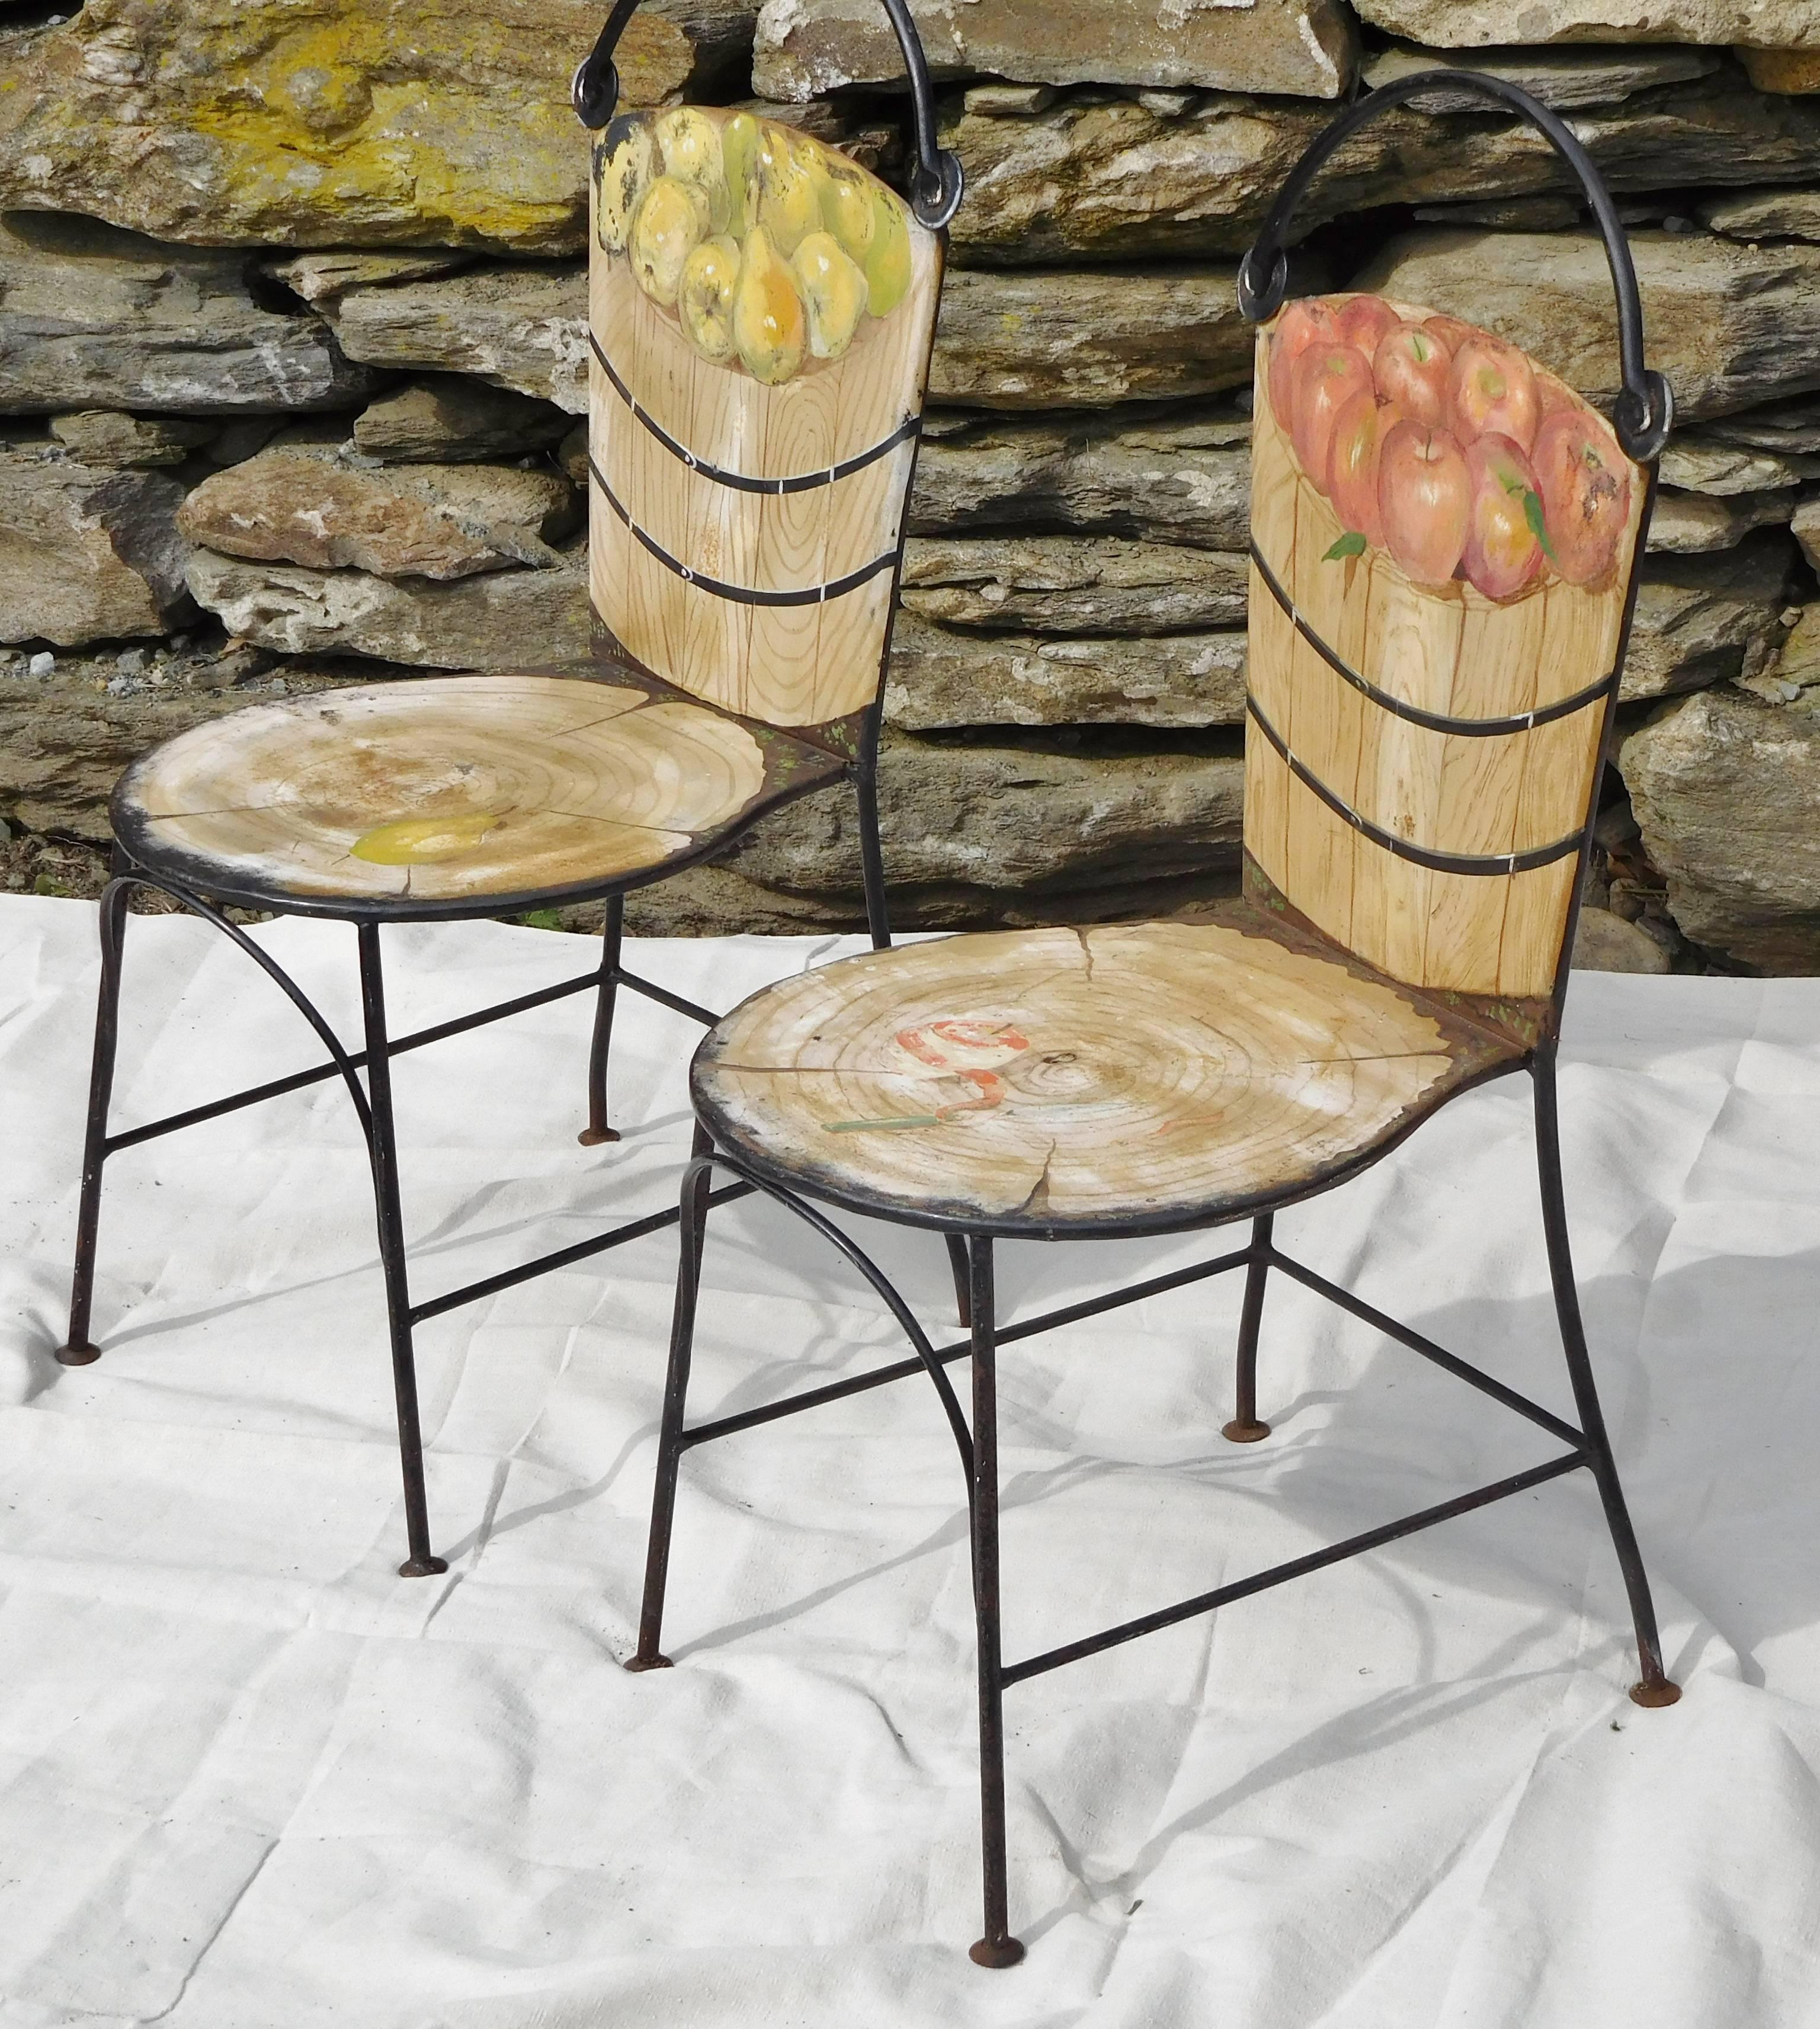 The famous basket chairs by antiques dealer and designer John Vesey (1924-1992) are shown here in a set of two, one depicting a wooden basket of pears and the other a wooden basket of apples. On the reverse side, the chair backs are painted as